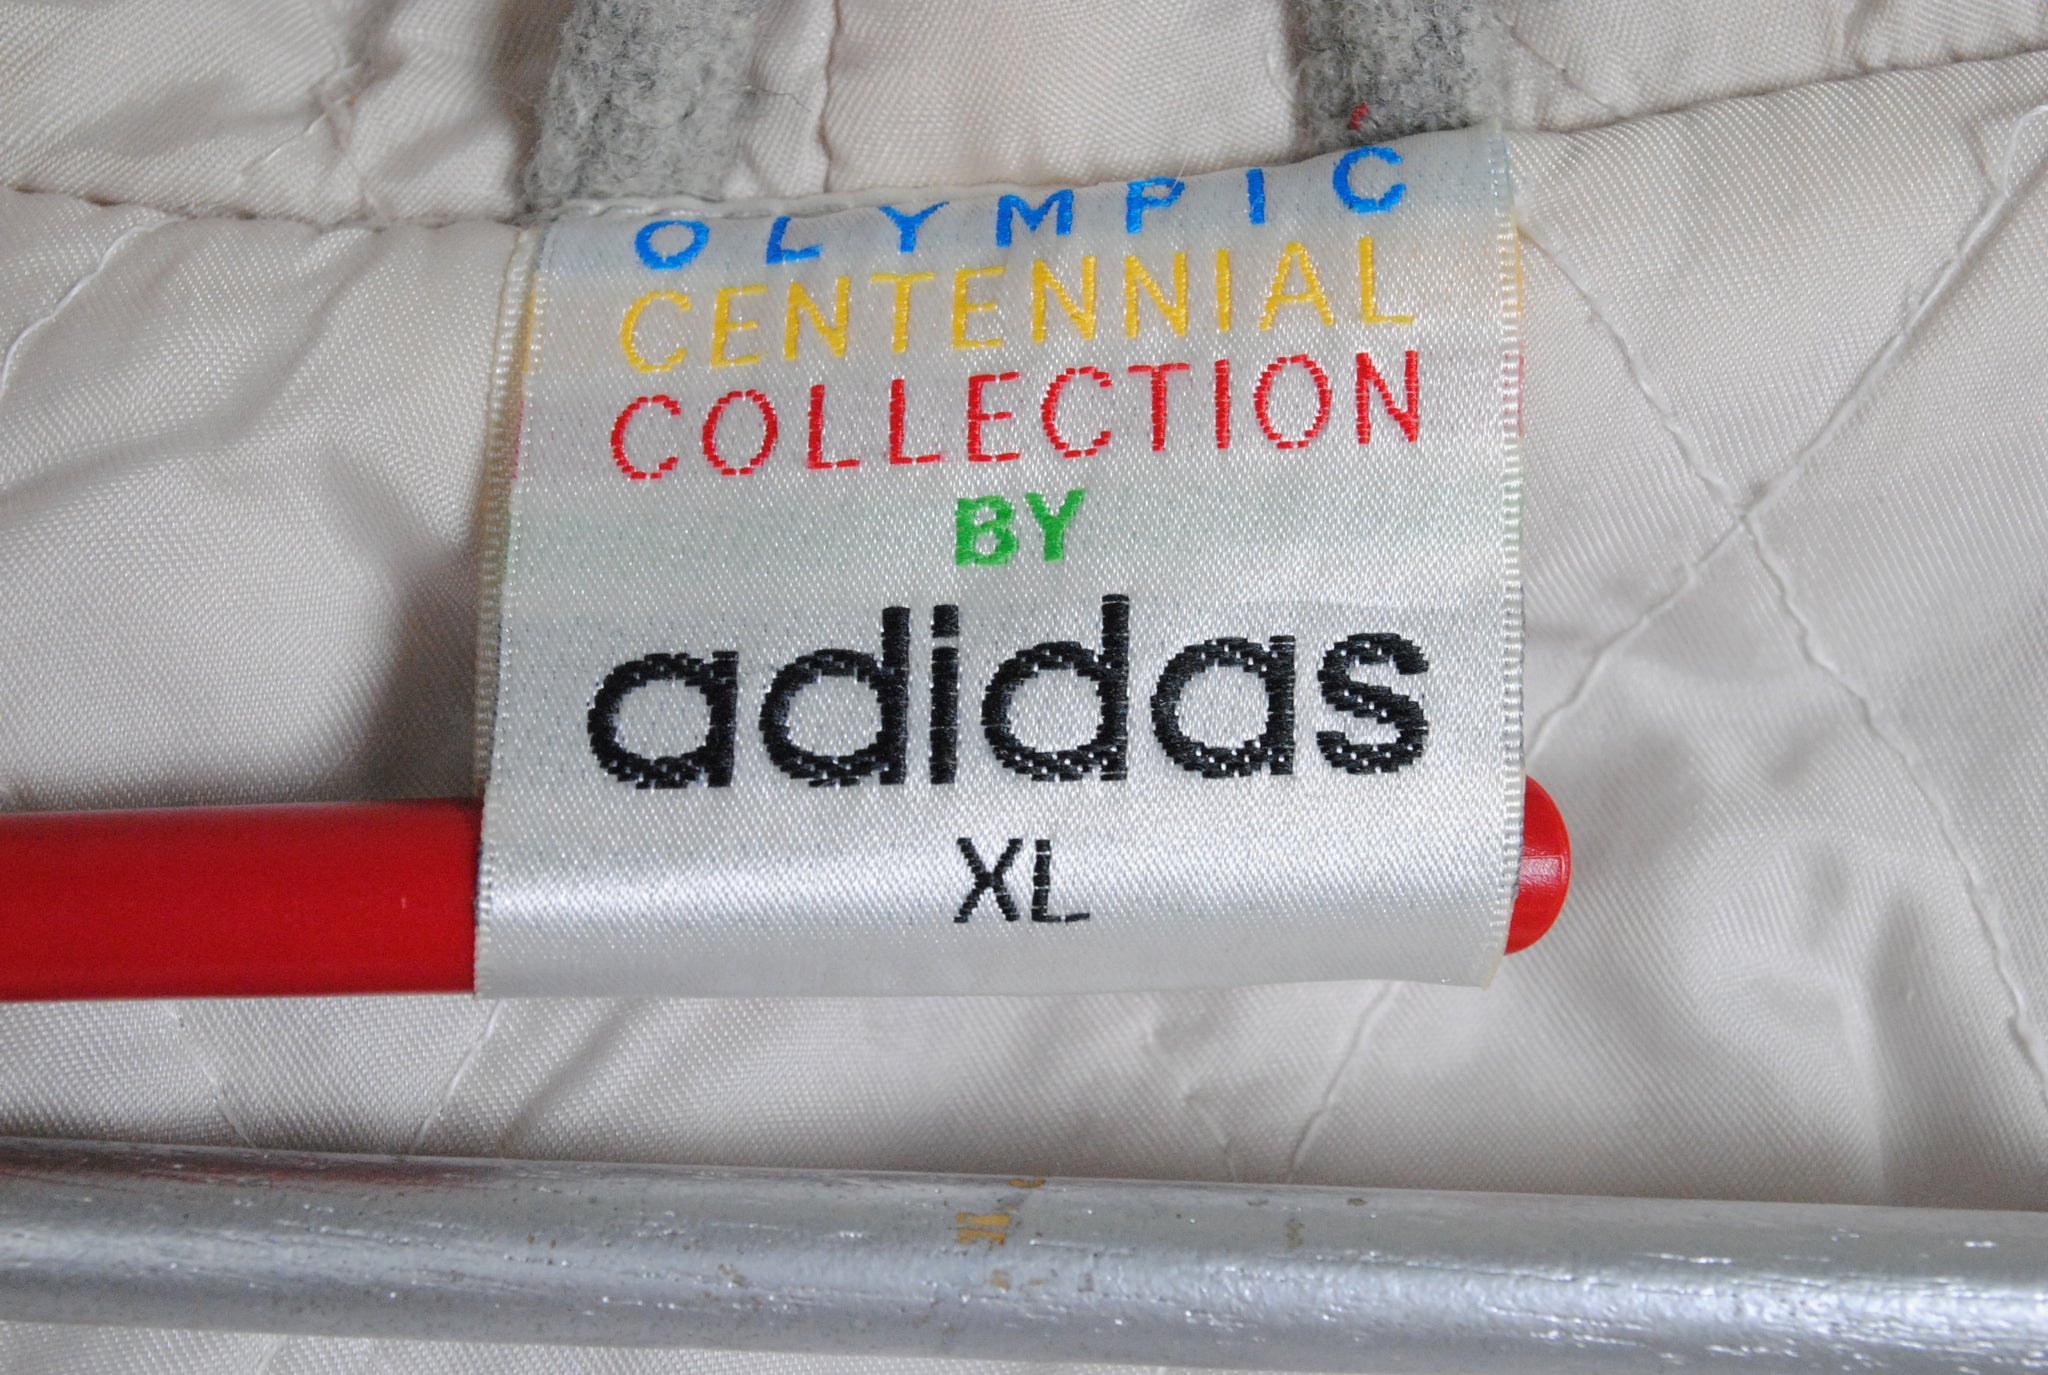 olympic centennial collection by adidas